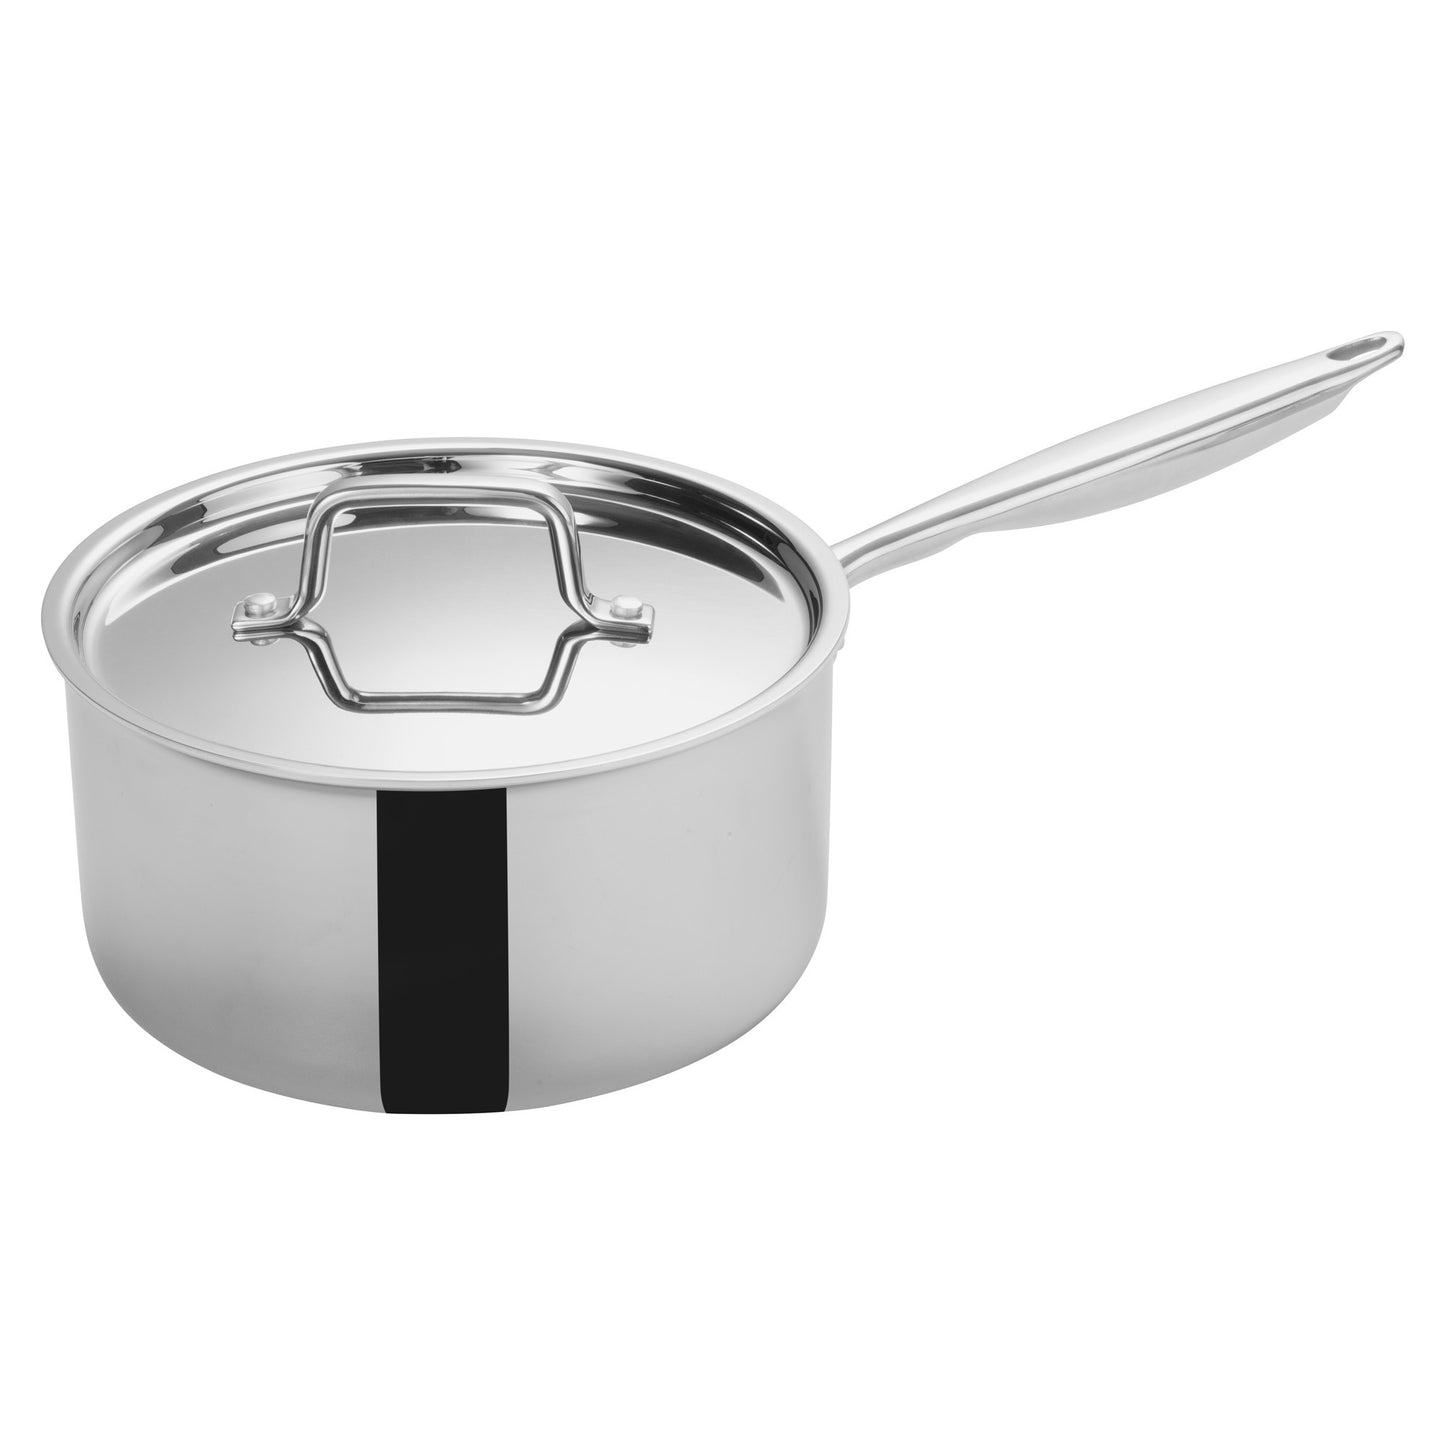 TGAP-5 - Tri-Gen Tri-Ply Stainless Steel Sauce Pan with Cover - 4-1/2 Quart